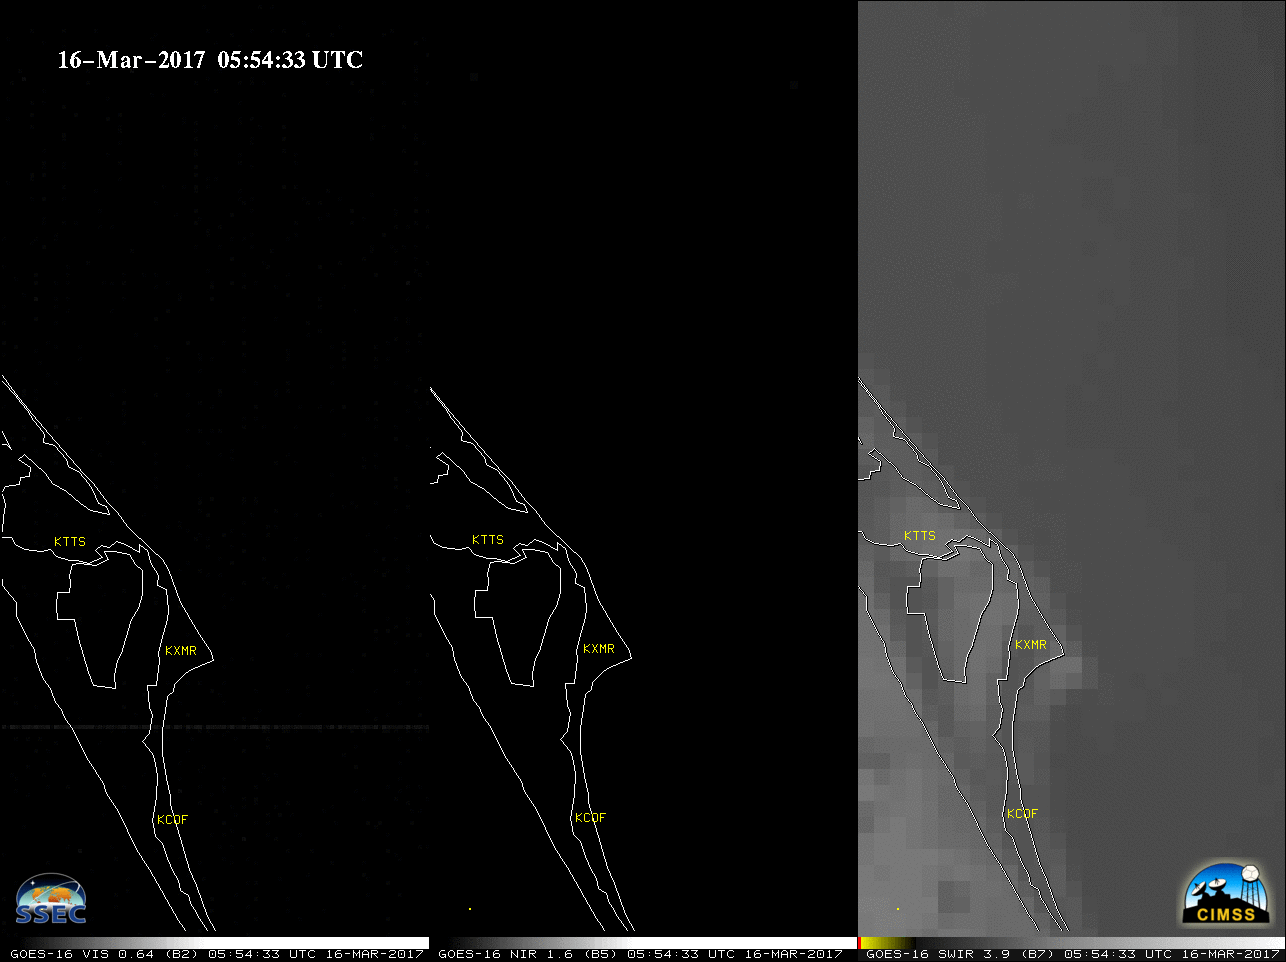 GOES-16 Visible (0.64 µm, left), Near-Infrared (1.61 µm, center) and Shortwave Infrared (3.9 µm, right) images [click to enlarge]